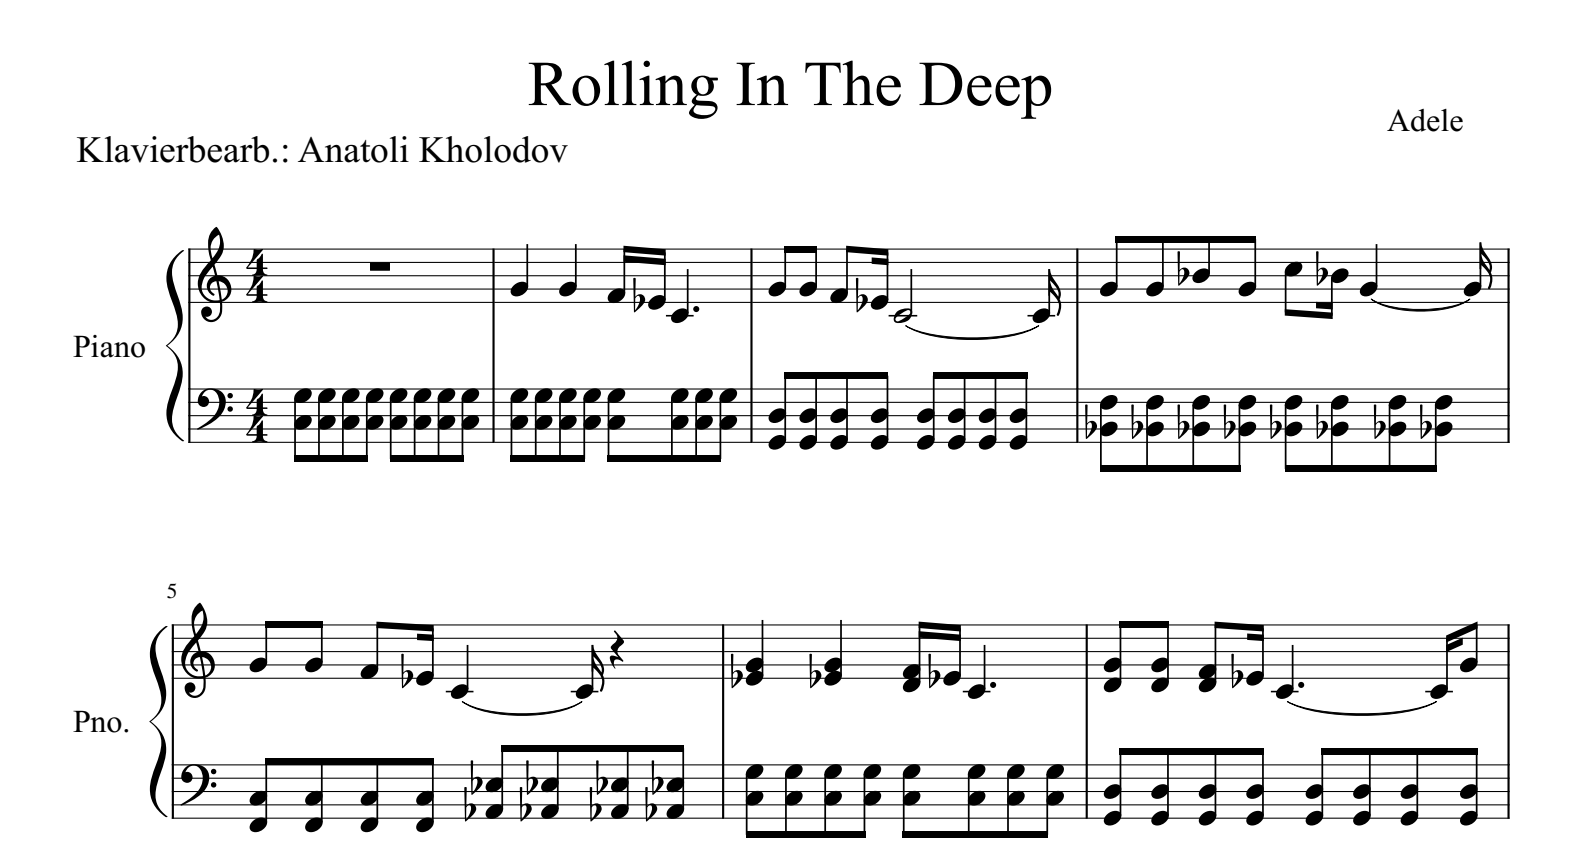 rolling in the deep piano midi - wellnesswaterfiltrationsystems.com.